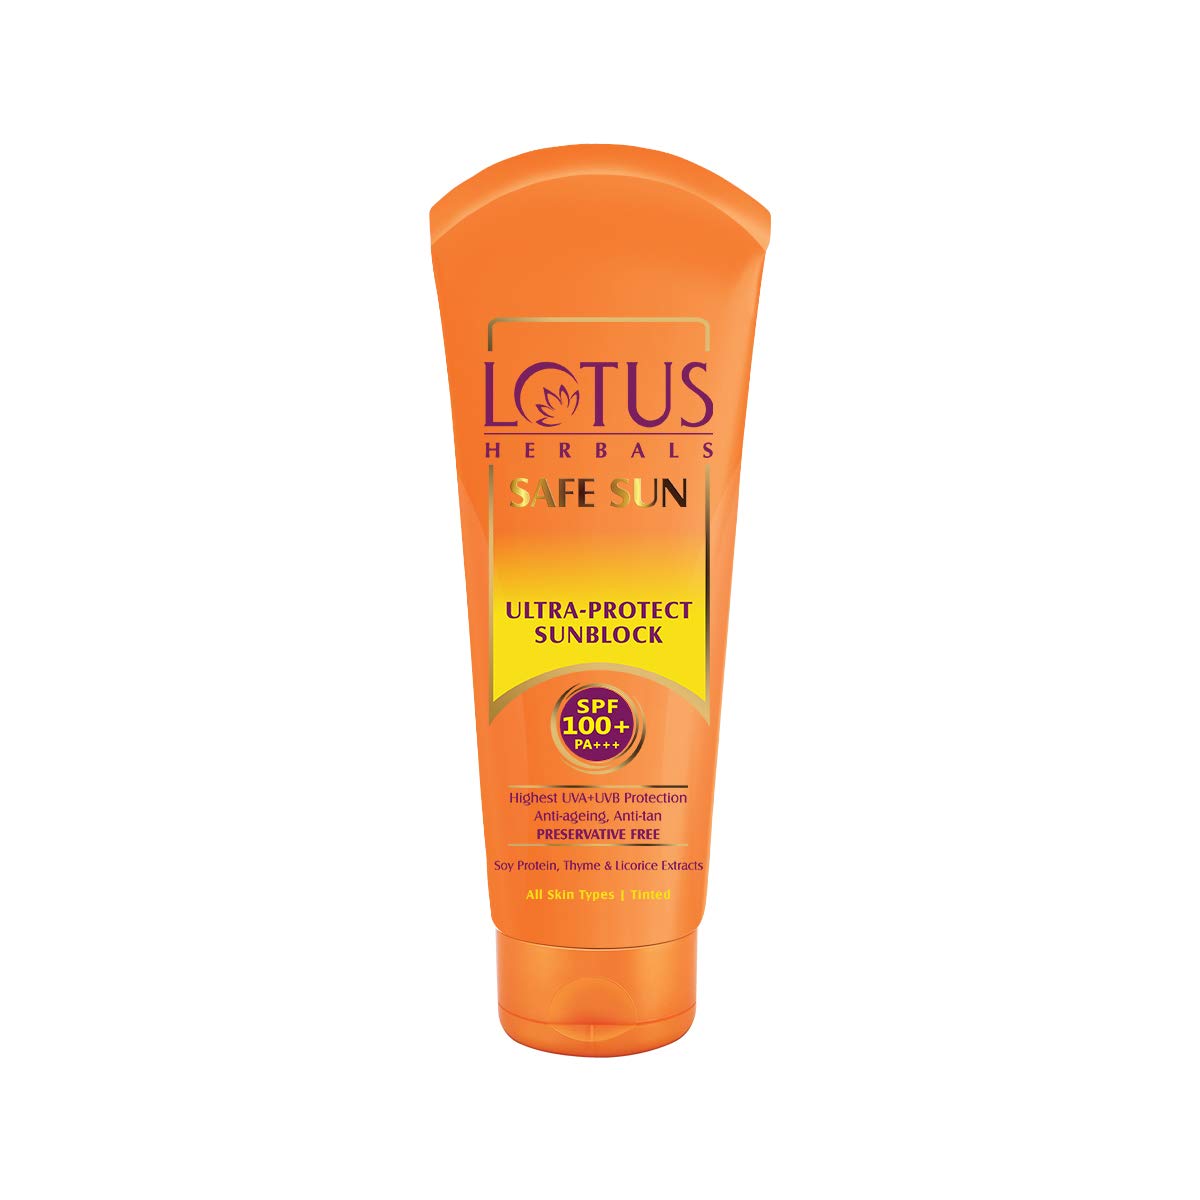 Lotus Herbals Safe Sun SPF100 Ultra-Protect Sunblock With Soy Protein, Thyme & Licorice Extracts 50g